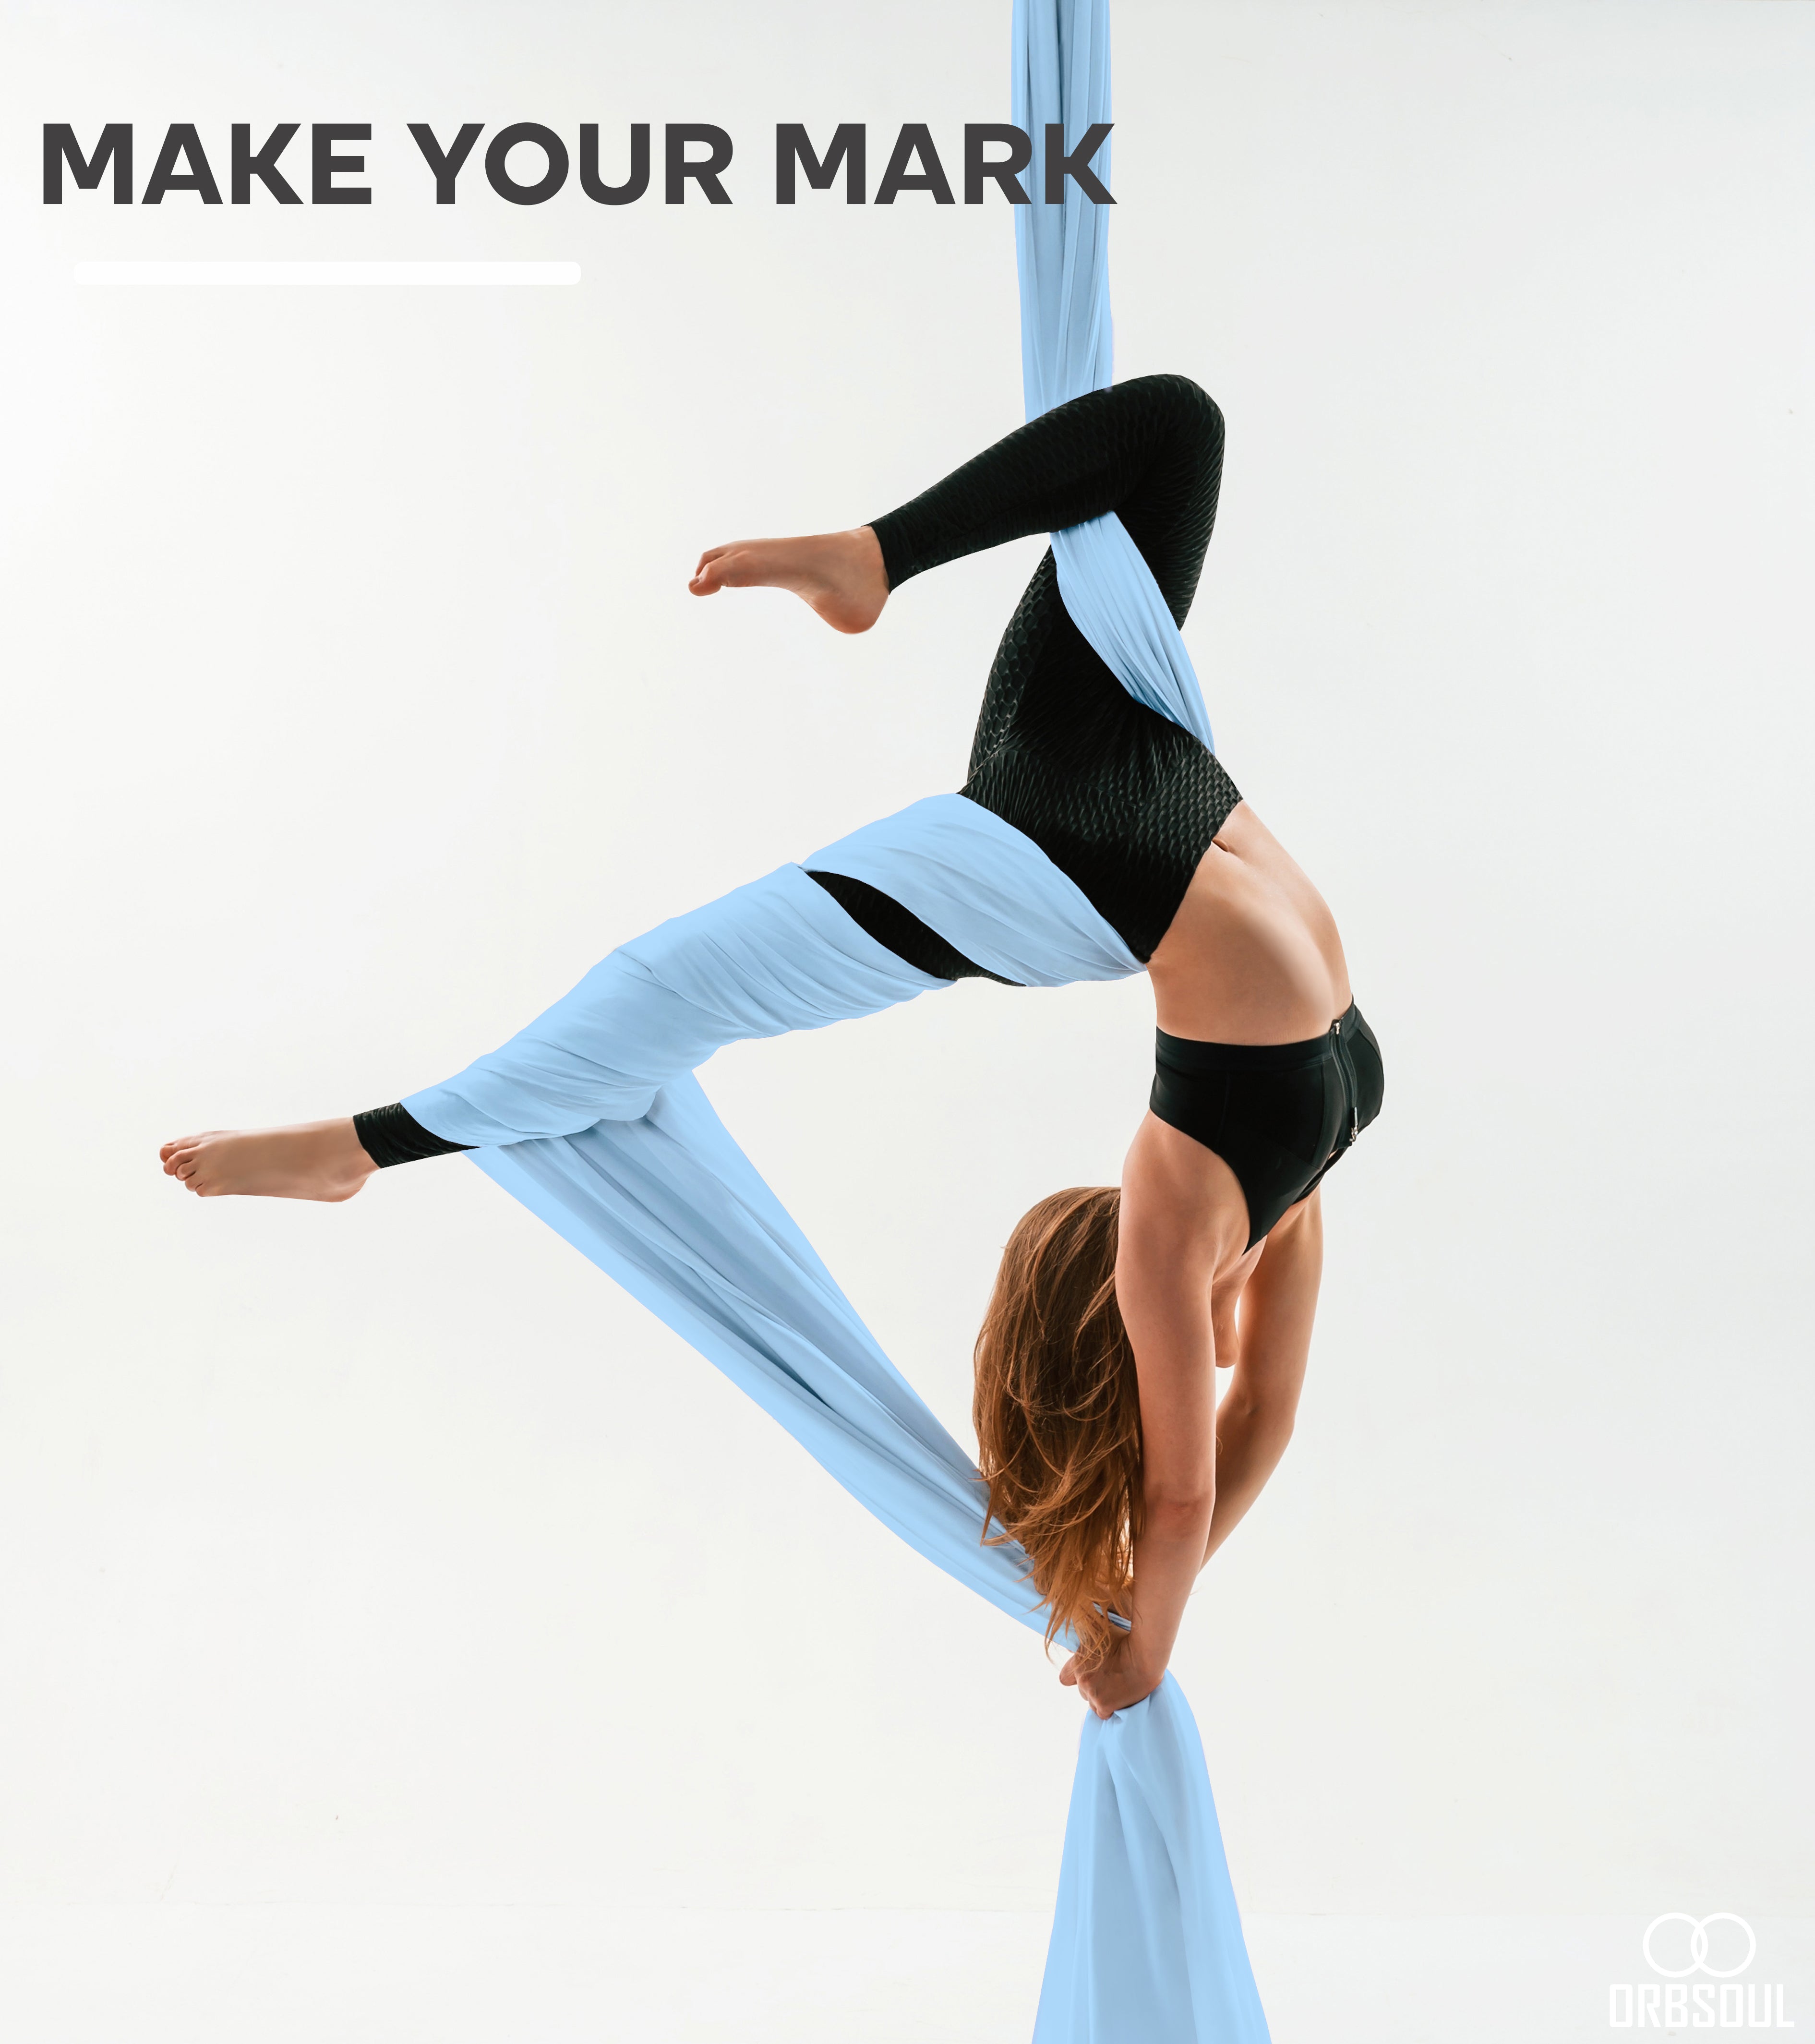 aerial artist performing on aerial silks with text saying make your mark